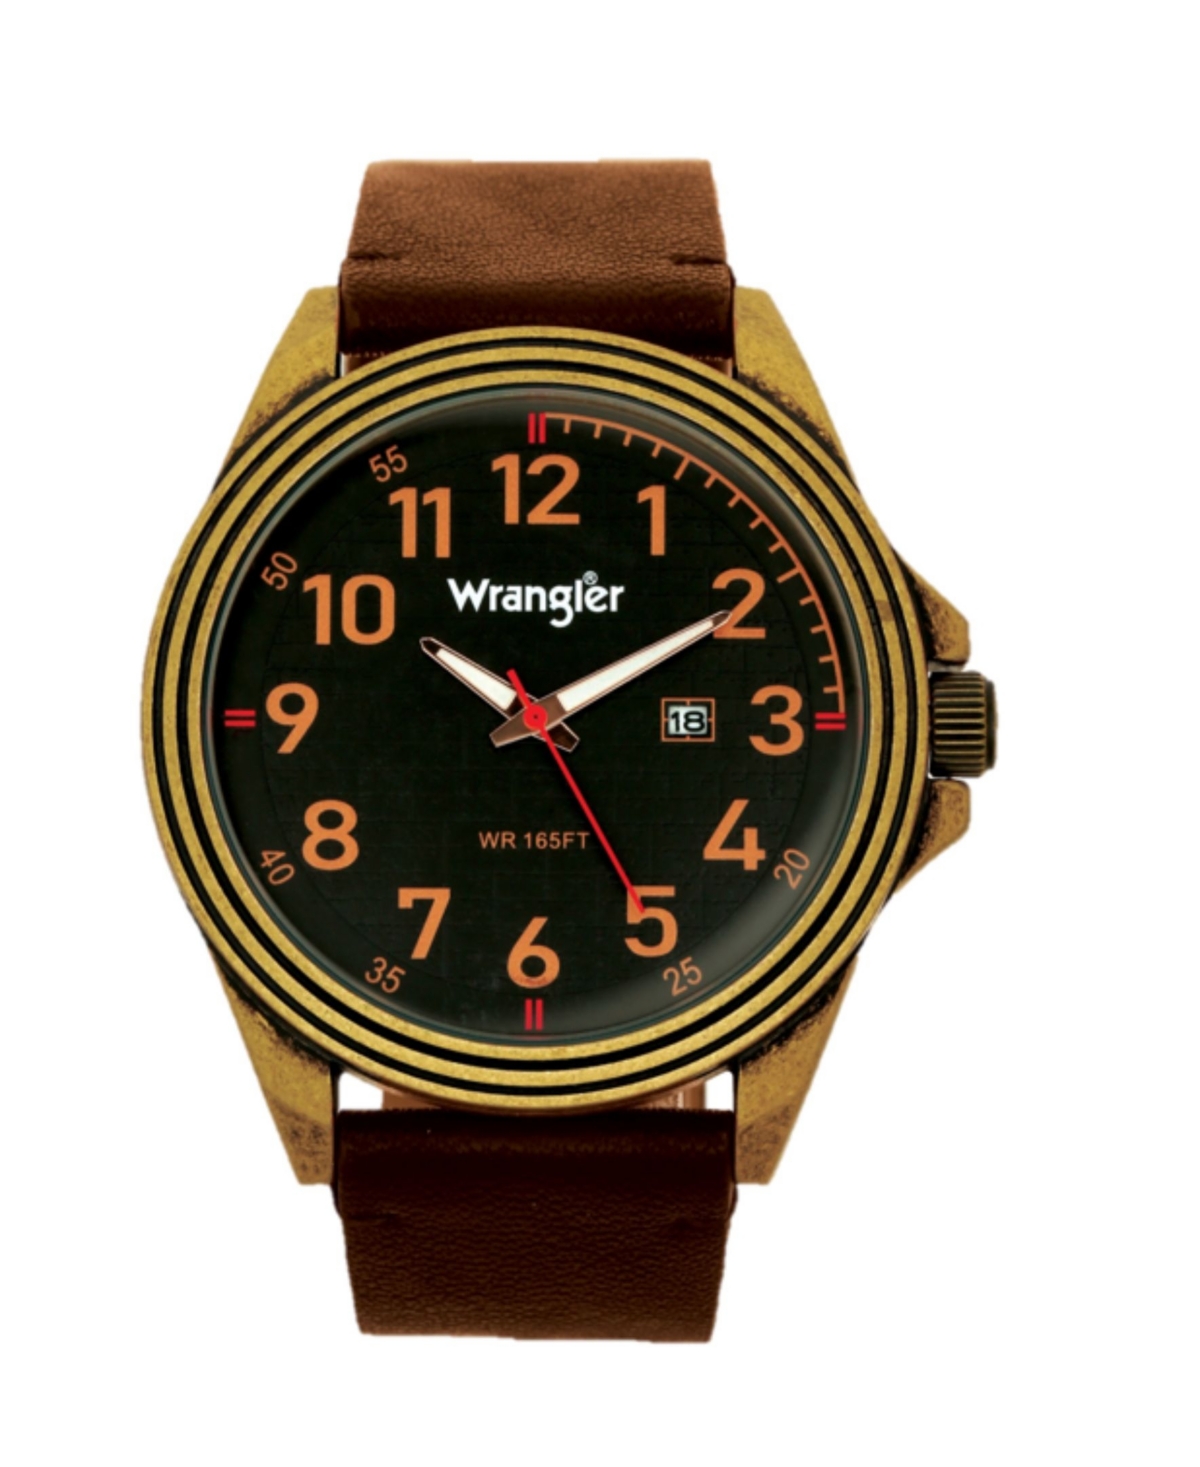 Men's, 48MM Antique Brass Case, Black Dial, Bronze Arabic Numerals, Black Strap, Analog Watch with Red Second Hand, Date Function - Black